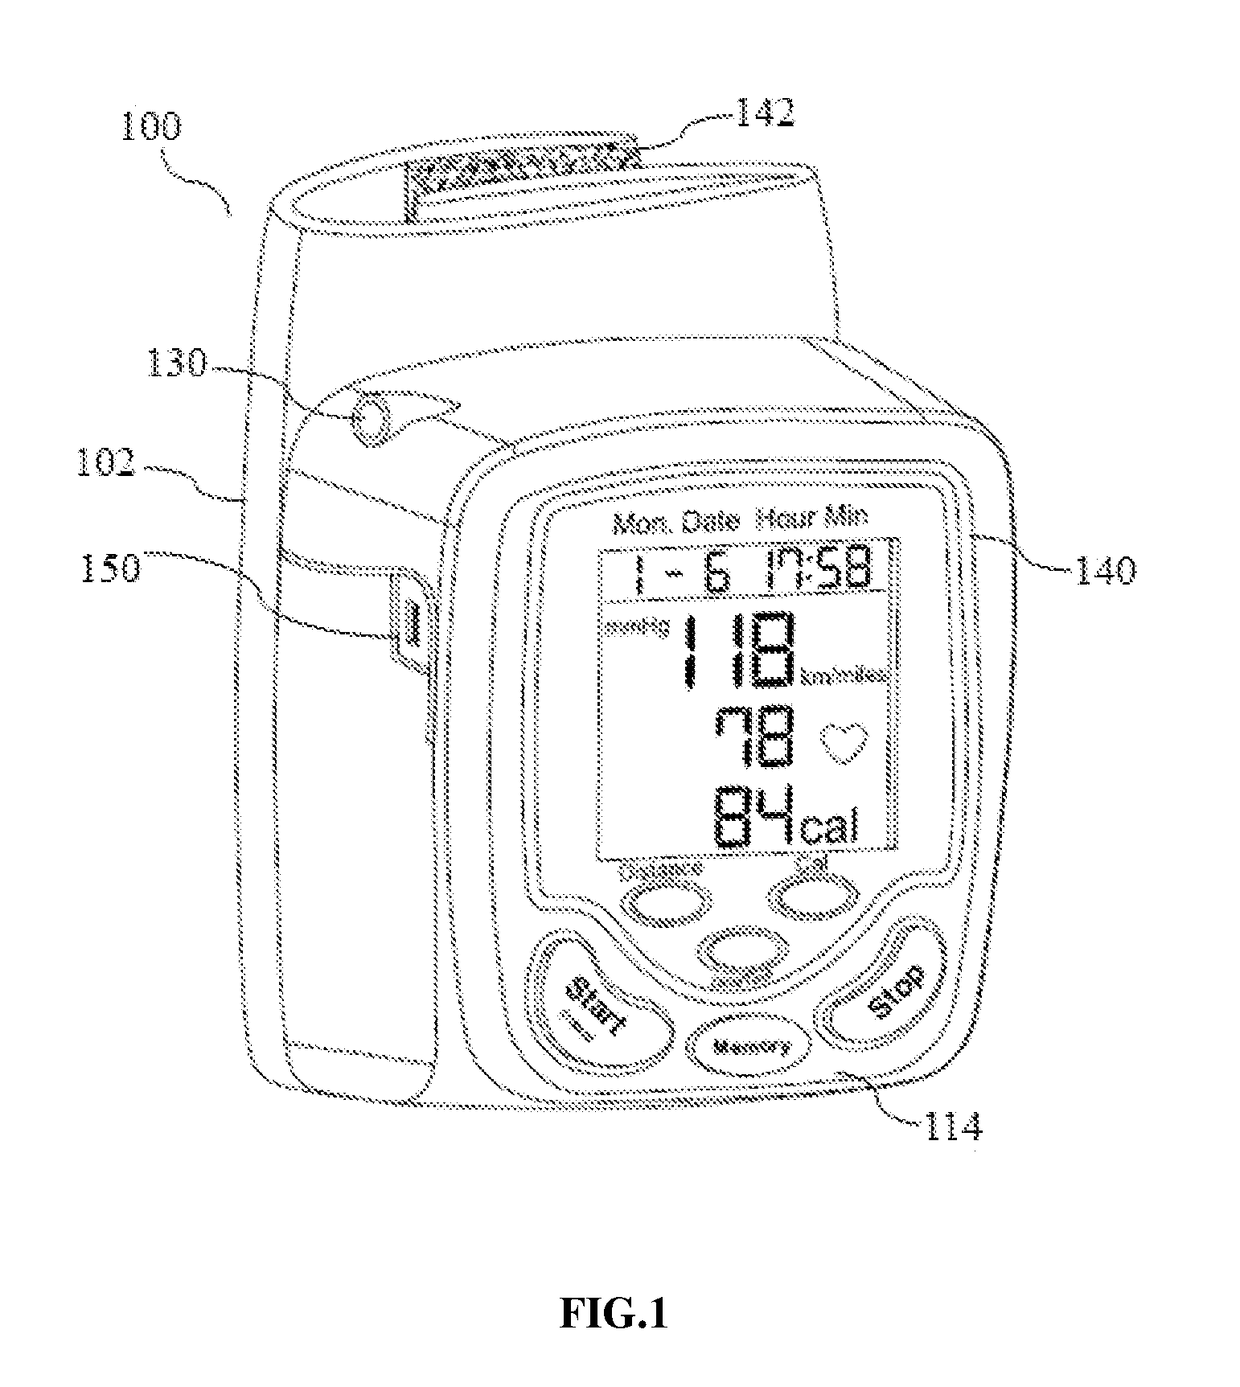 Fitness monitoring device